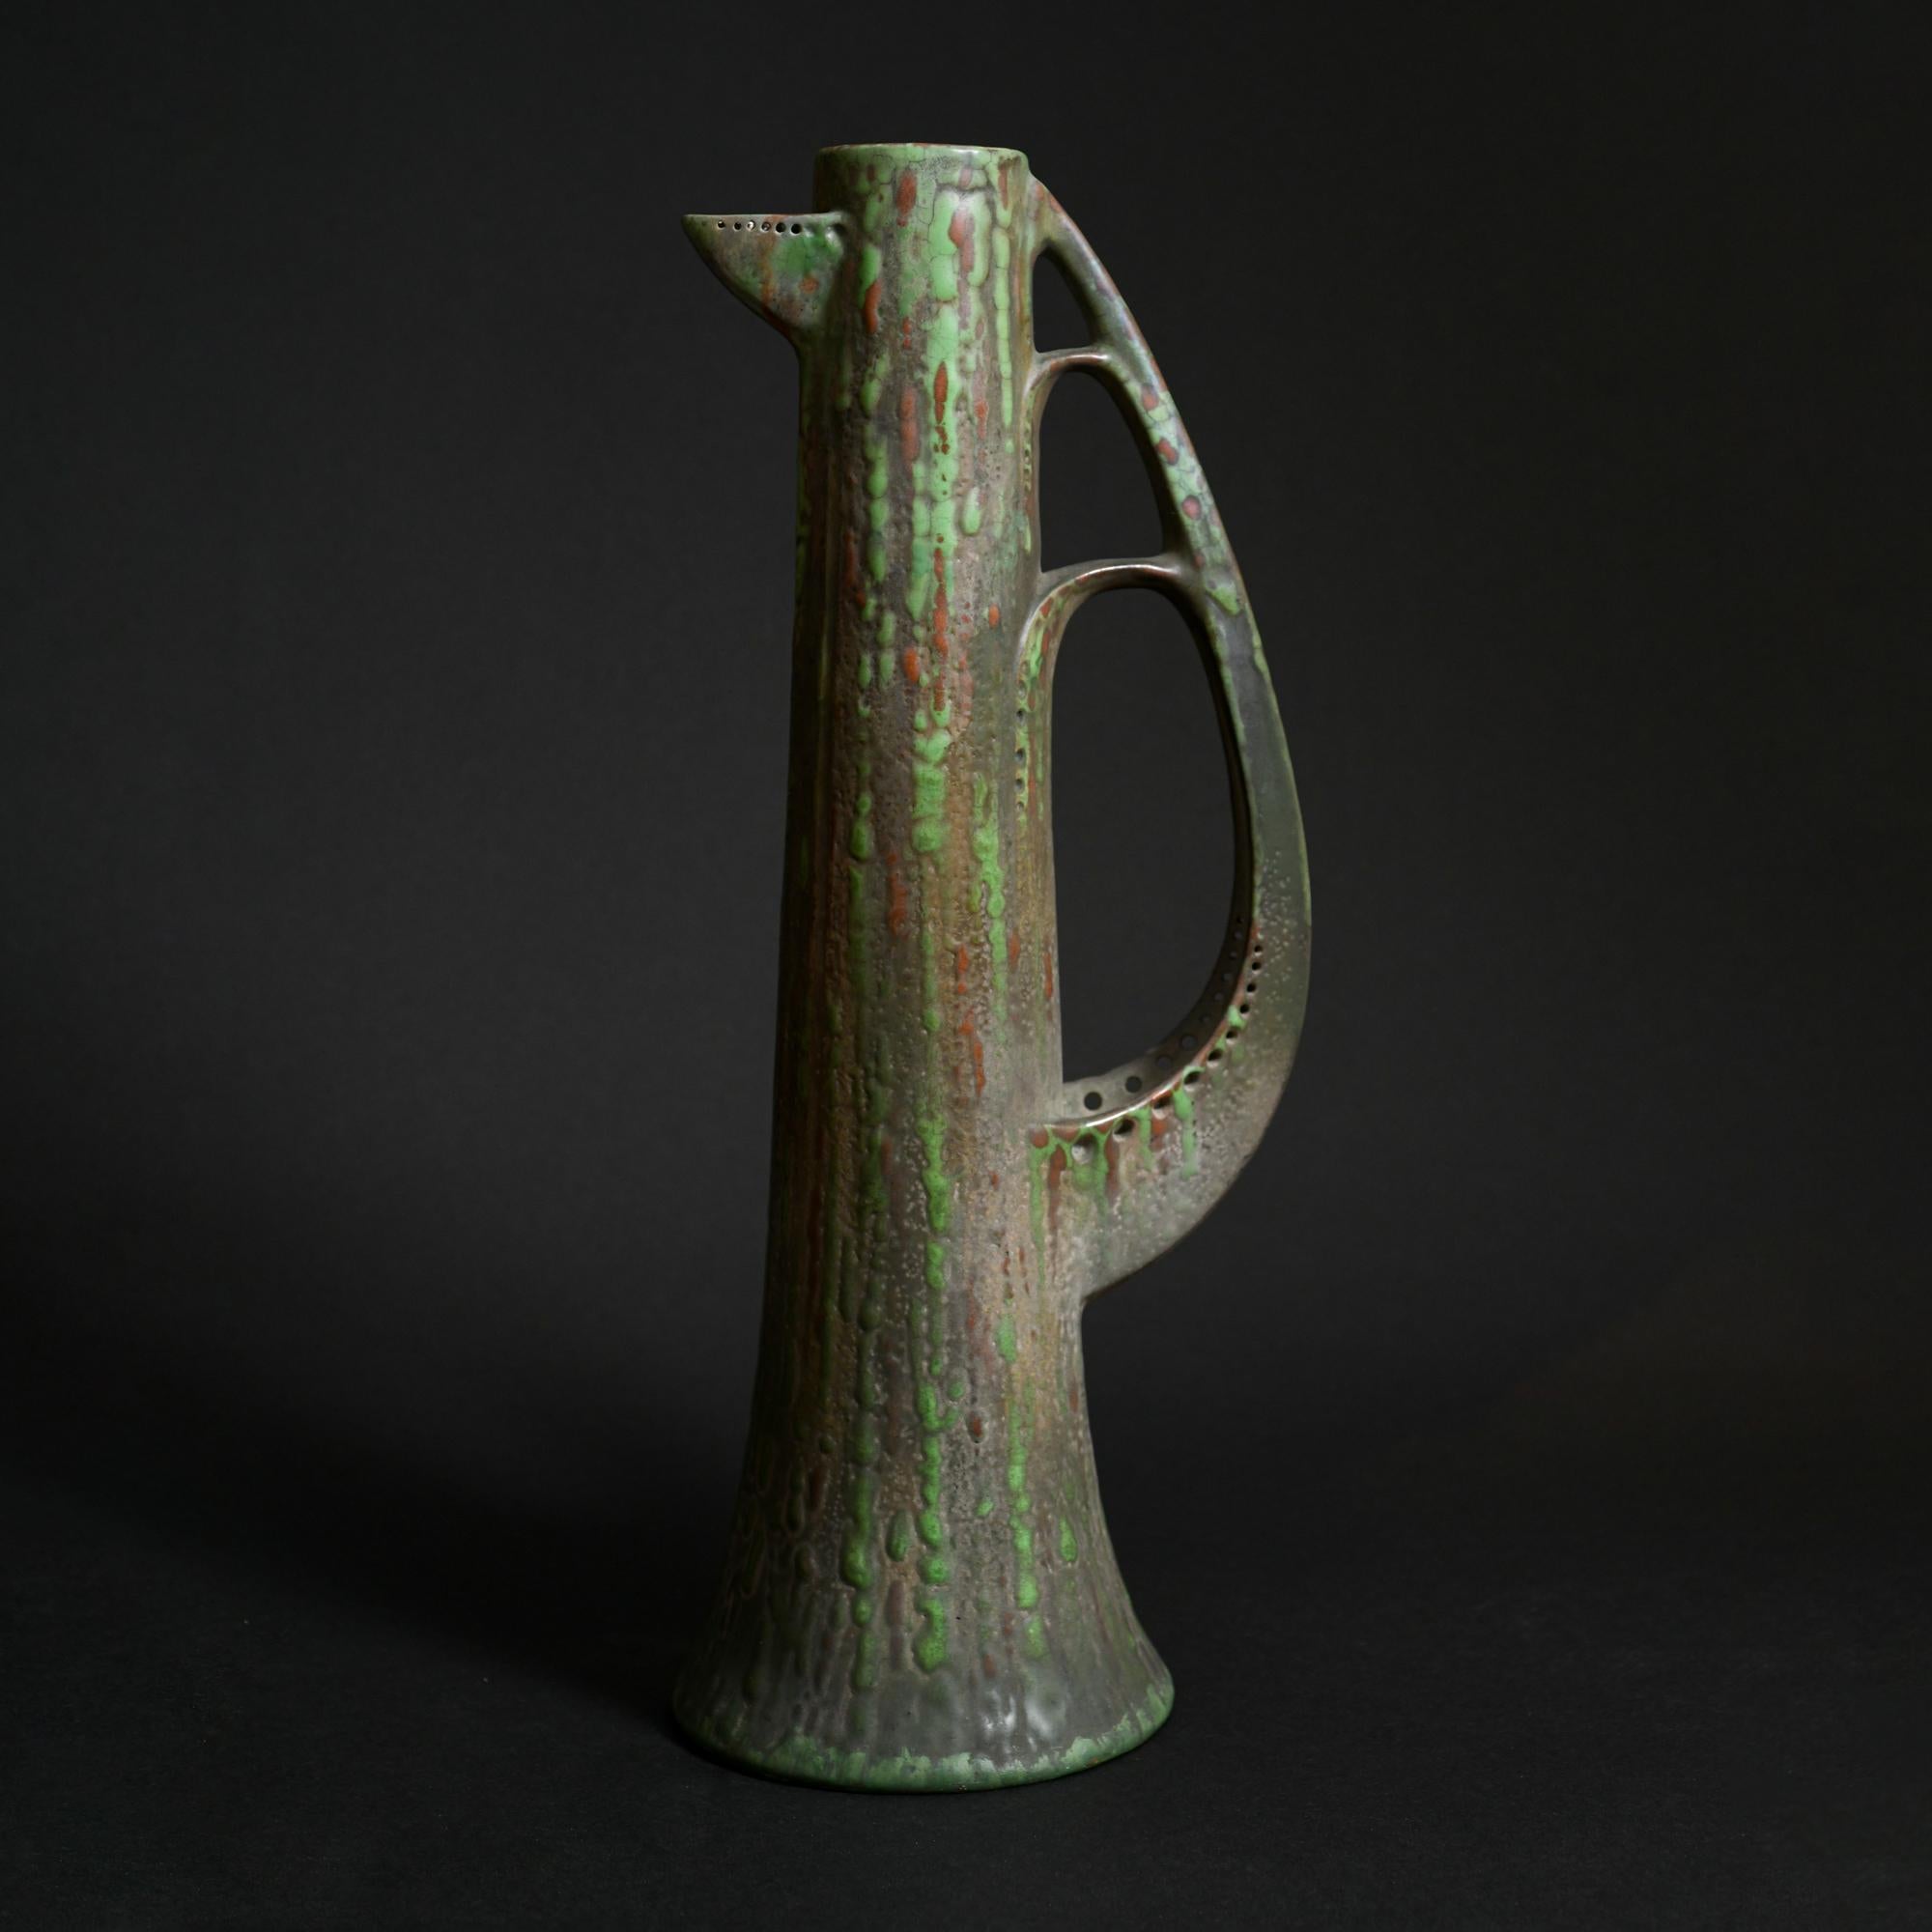 Austrian ceramist Paul Dachsel designed this unusually shaped pitcher, made of hard earthenware and covered in a light green glaze. Its slim and elongated body gives the piece an elegant look, accentuated by a highly stylized handle that evokes